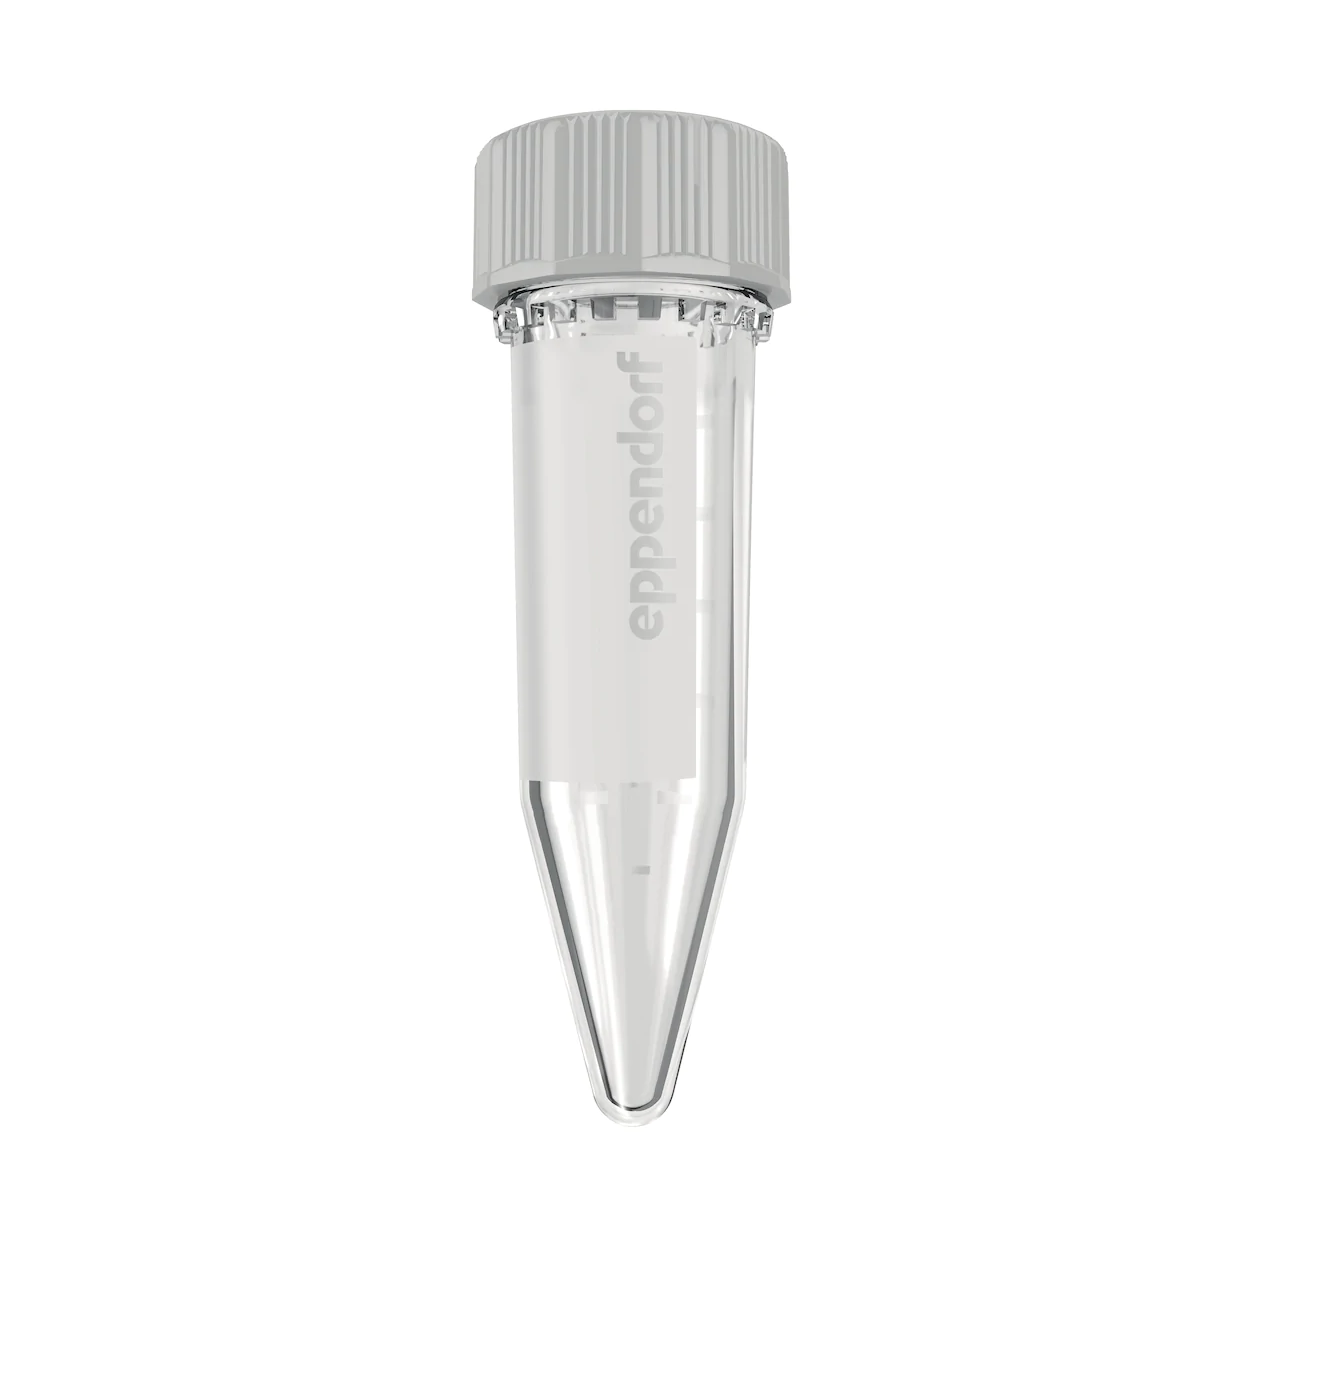 Eppendorf Tubes® 5.0 mL with screw cap, 5.0 mL, Forensic DNA Grade, colorless, 200 tubes (2 bags × 100 tubes)